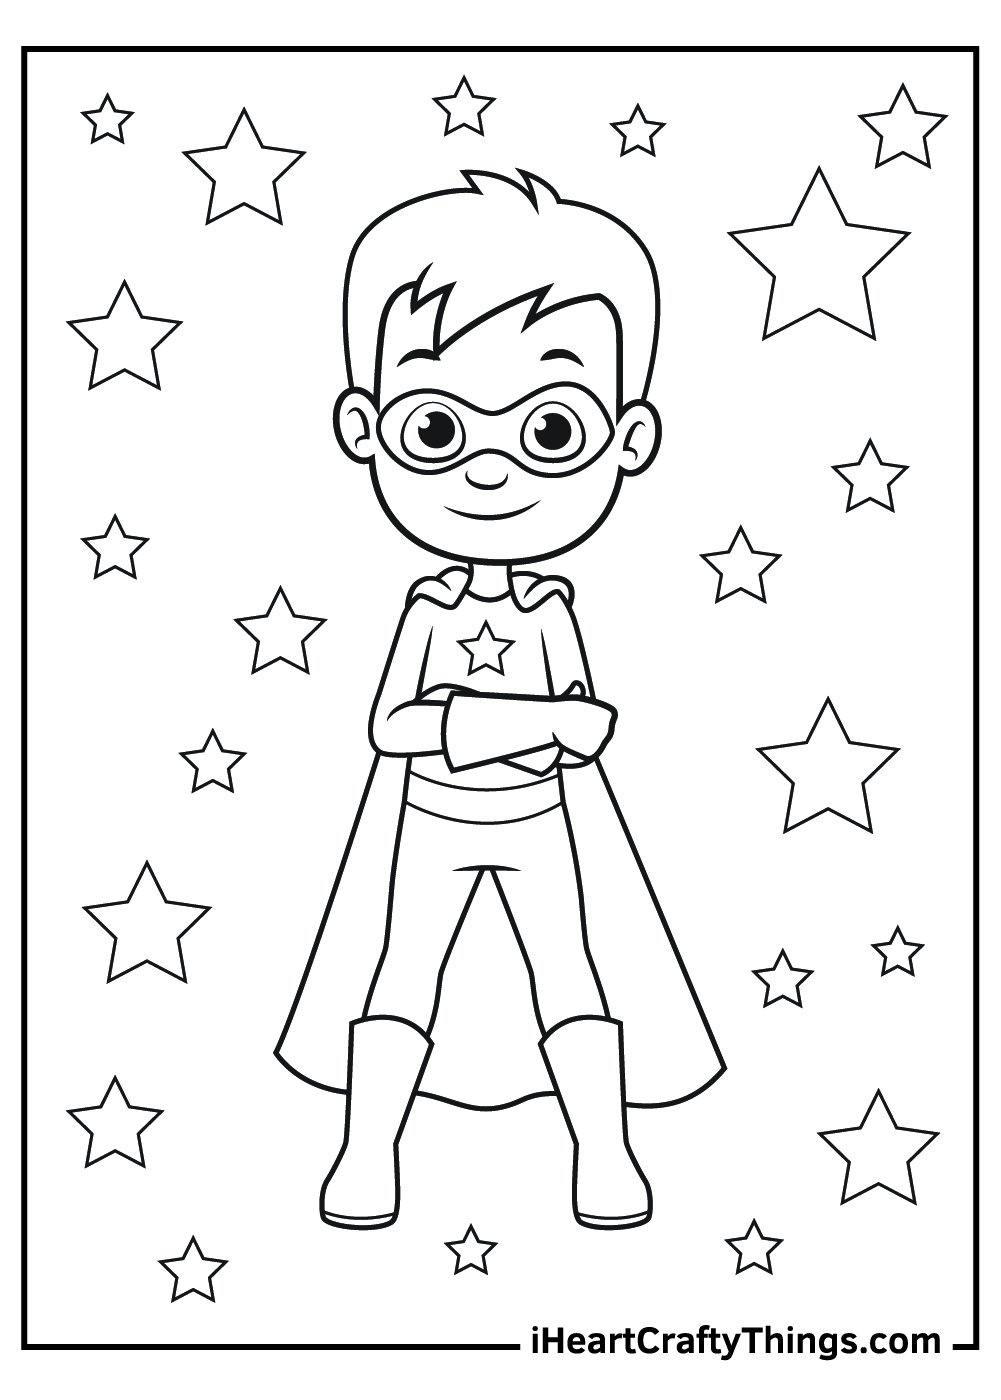 Superhero Coloring Pages Updated 2021 